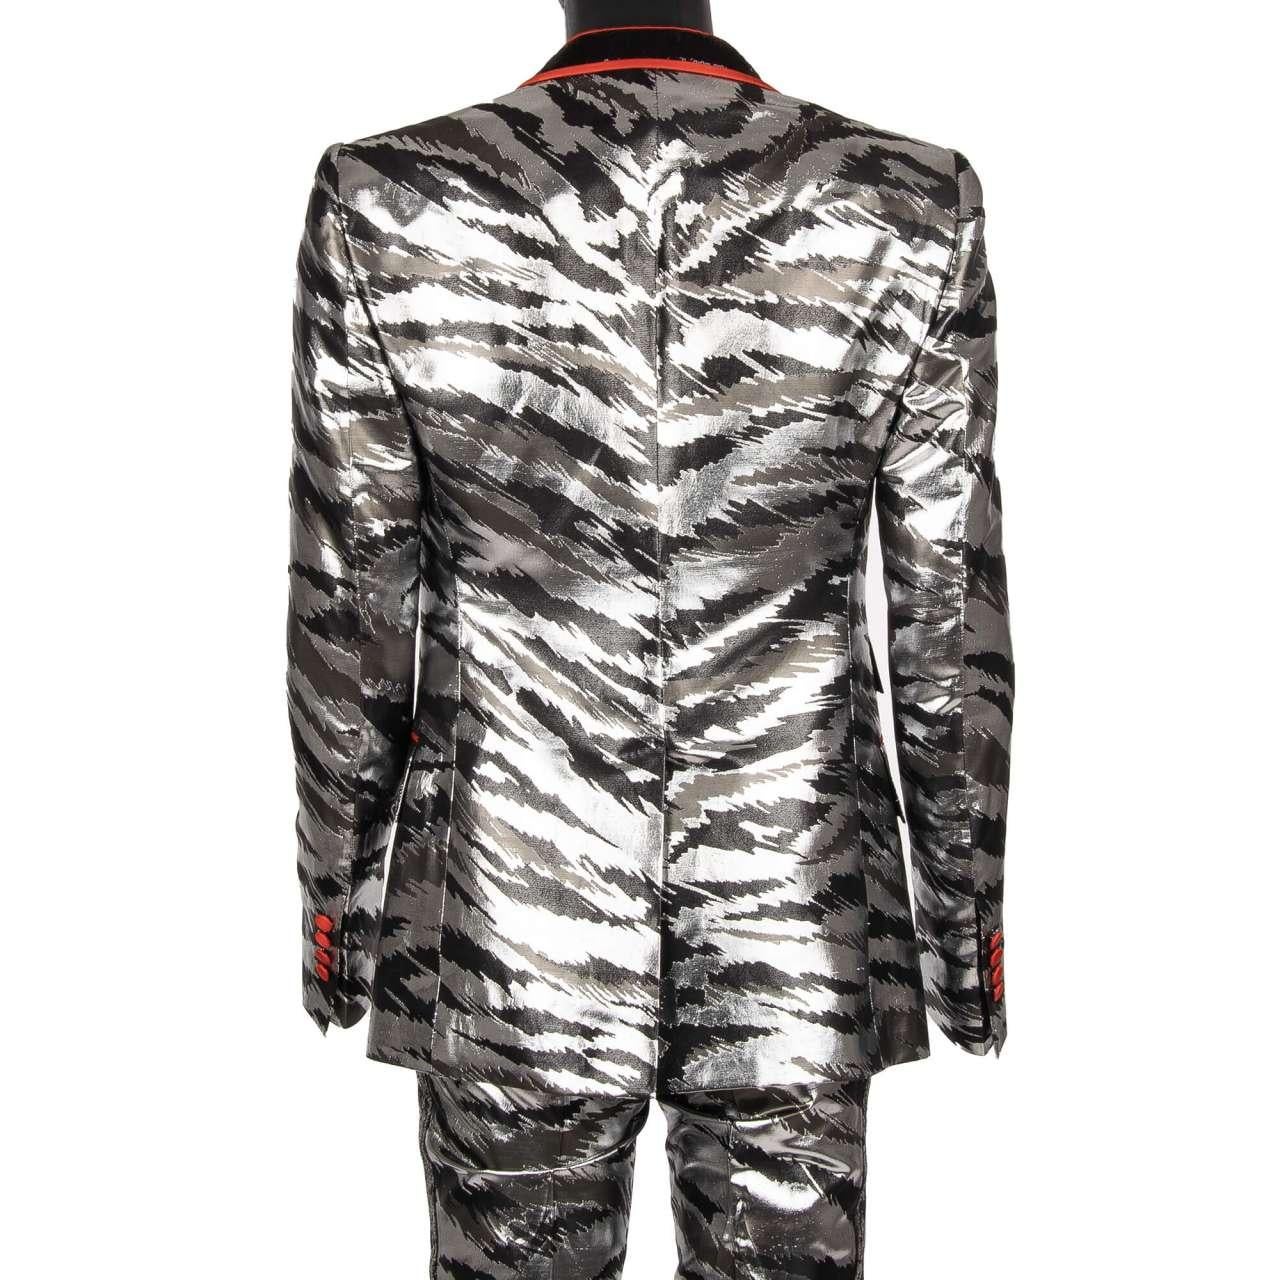 D&G Sequin Jacquard Double breasted Suit Silver Black Red 50 US 40 M L For Sale 3